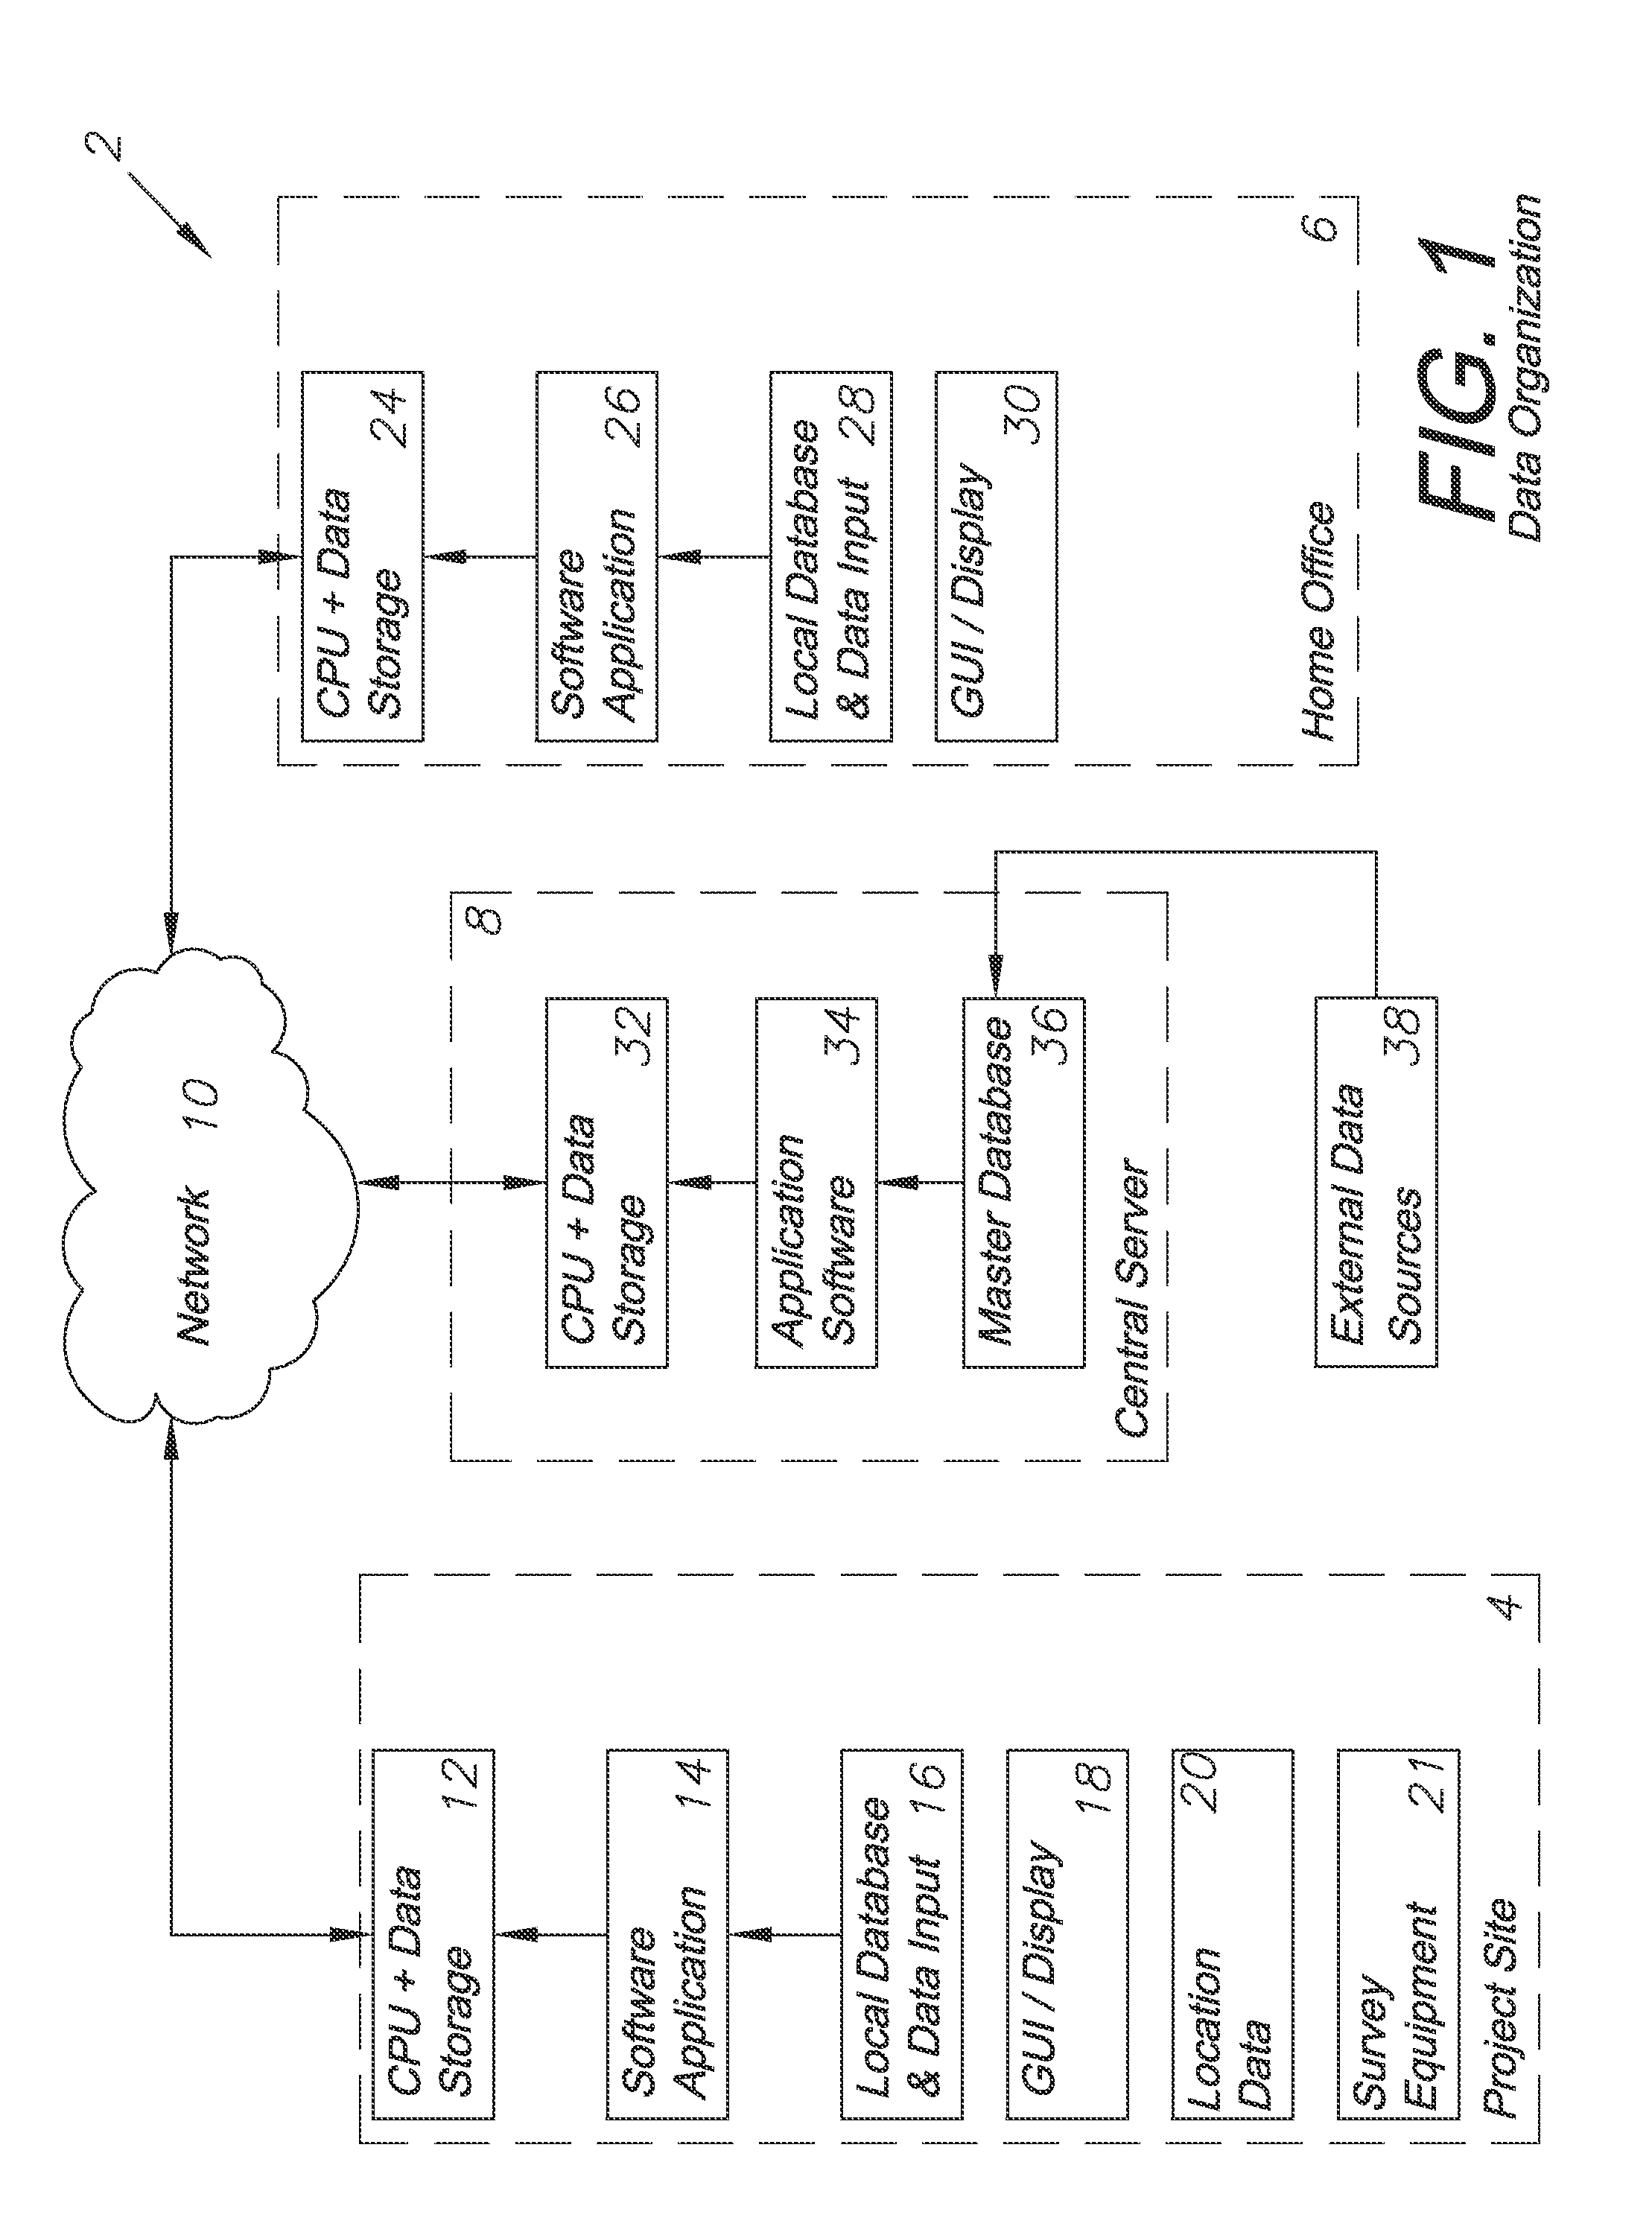 Infrastructure management, model, and deliverable creation system and method of use